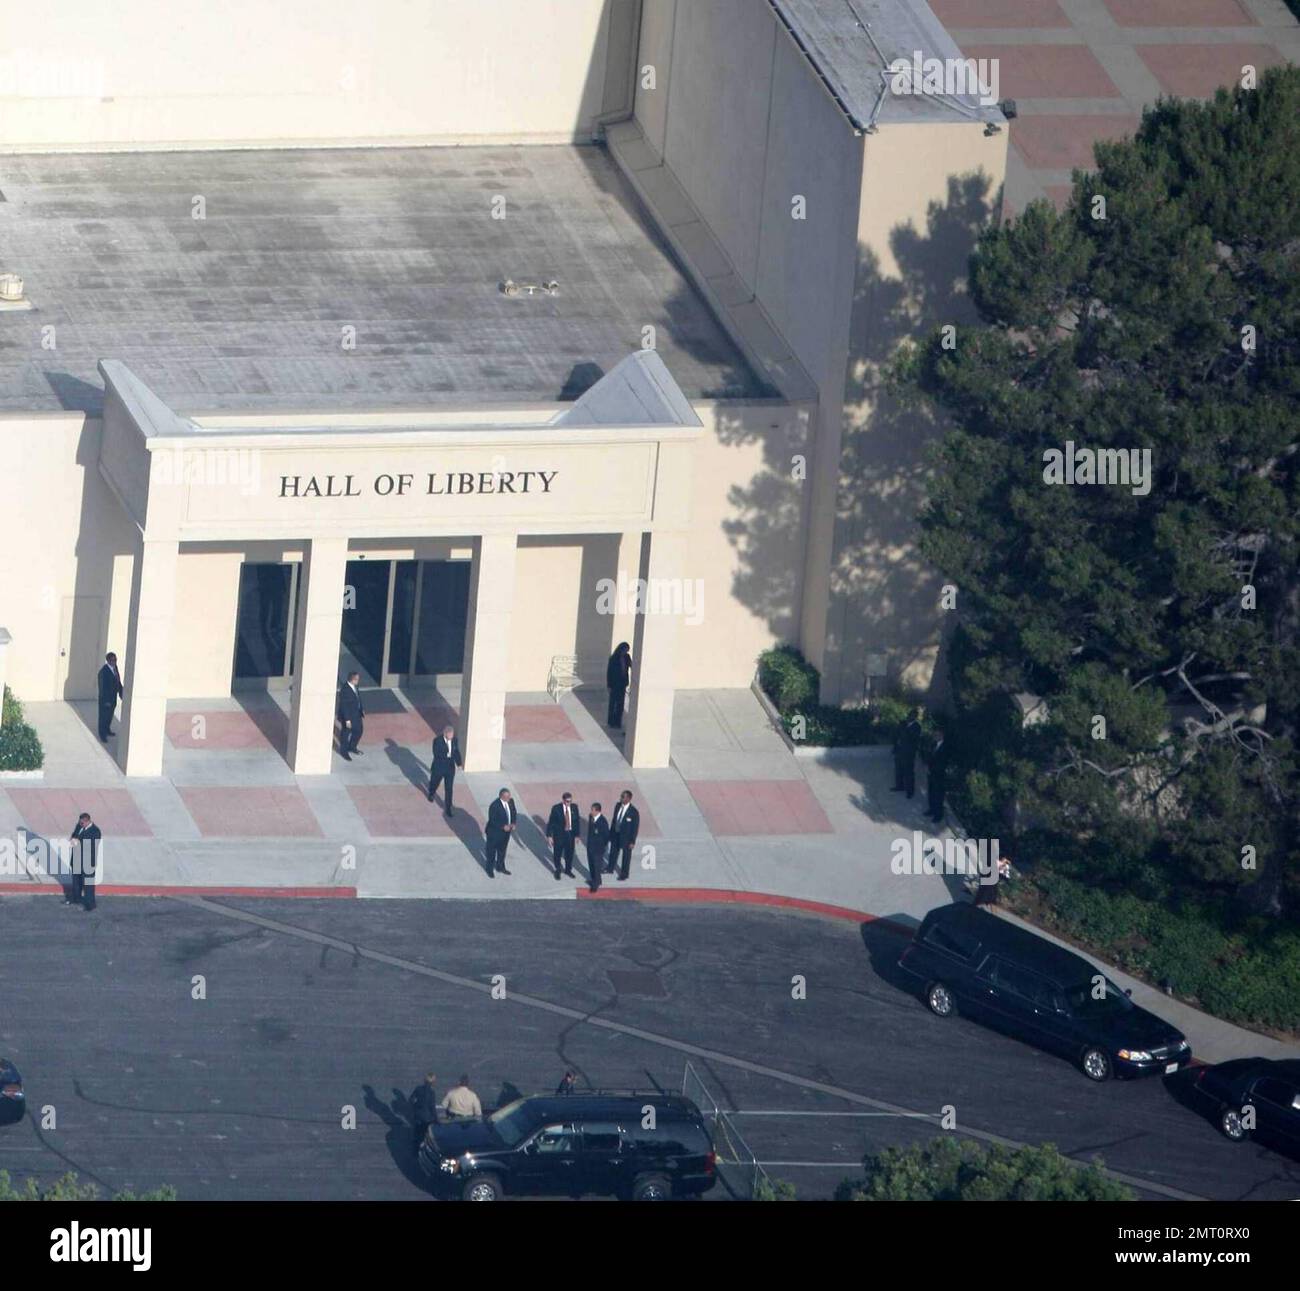 Aerial views of Forest Lawn Cemetery  where Michael Jackson's private funeral was held. Guests arrived for the service and the casket was loaded into a hearse before the motorcade started it's journey to the Staples Center memorial.  Los Angeles, CA 7/7/09 Stock Photo